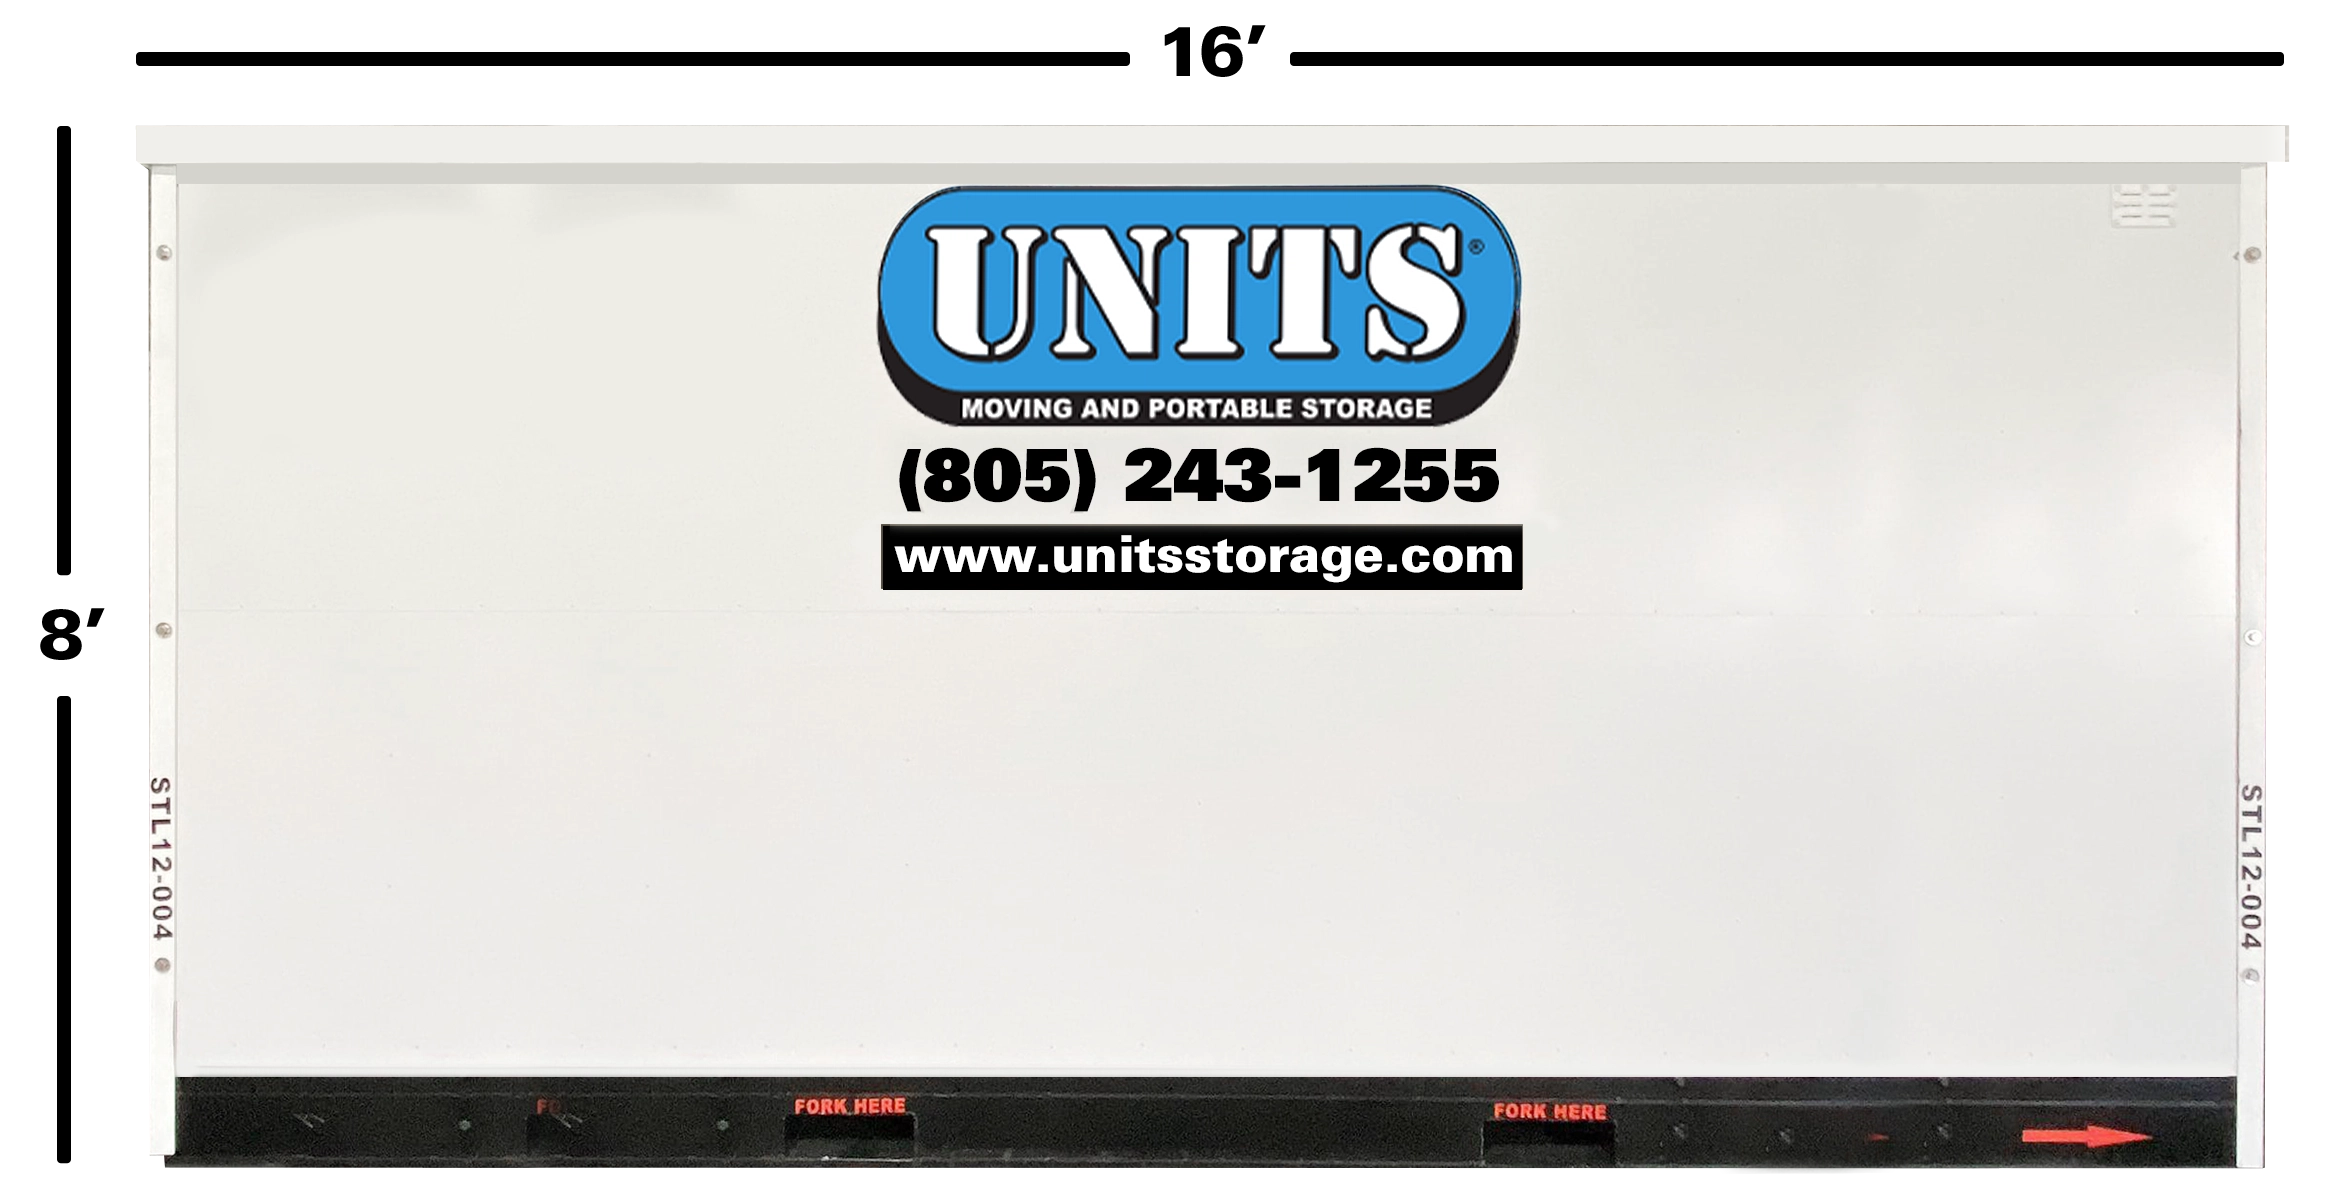 UNITS Moving and Portable Storage of Wilmington Logo